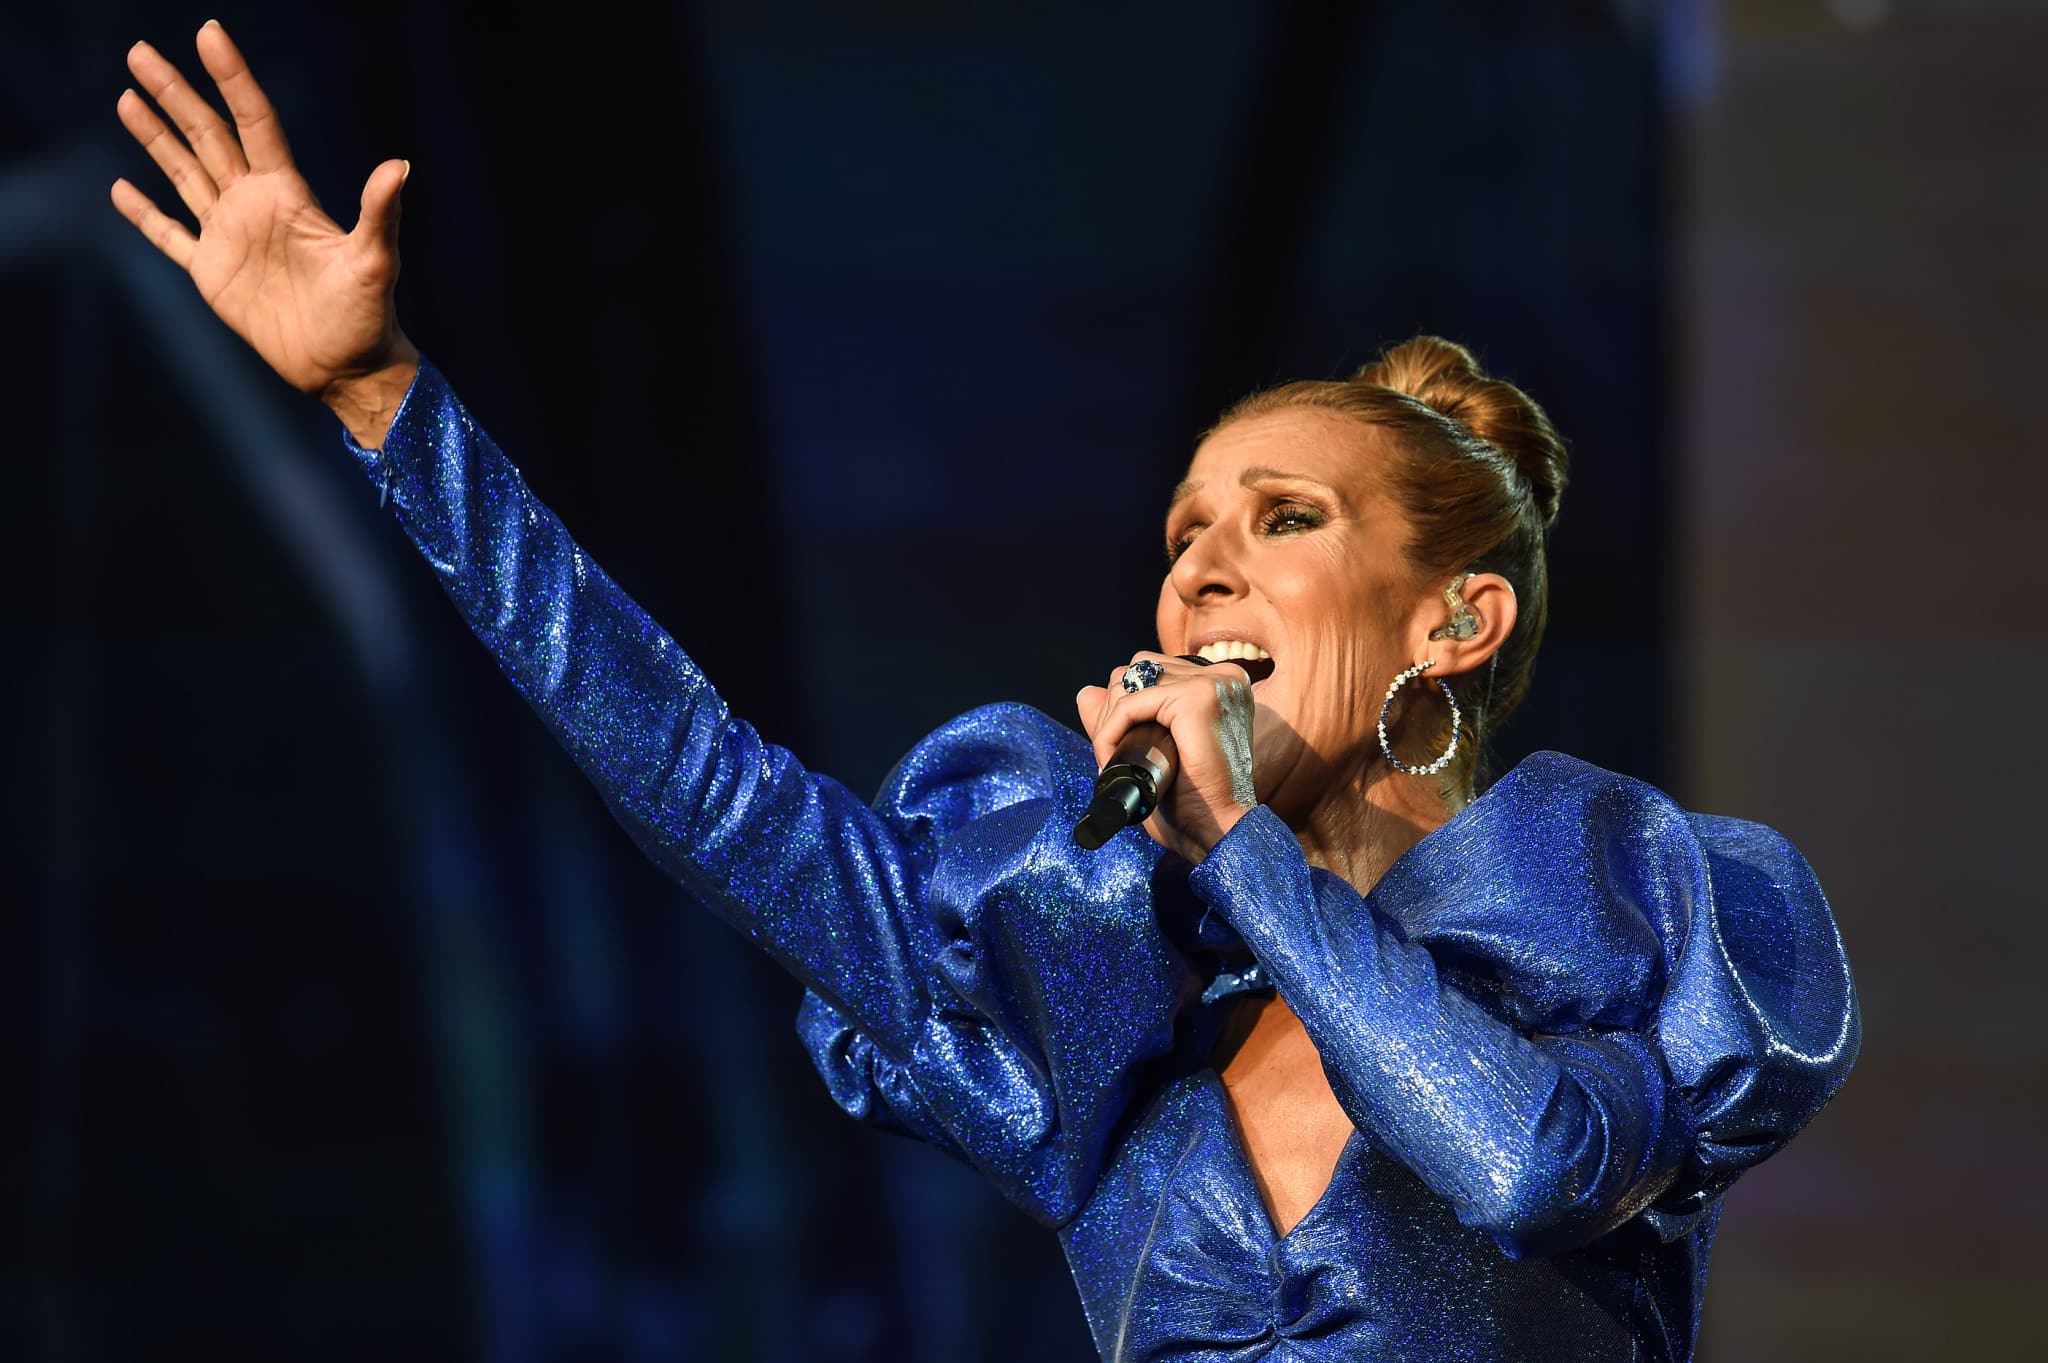 LONDON, ENGLAND - JULY 05: Celine Dion performs live at Barclaycard Presents British Summer Time Hyde Park at Hyde Park on July 5, 2019 in London, England. (Photo by Brian Rasic/WireImage)